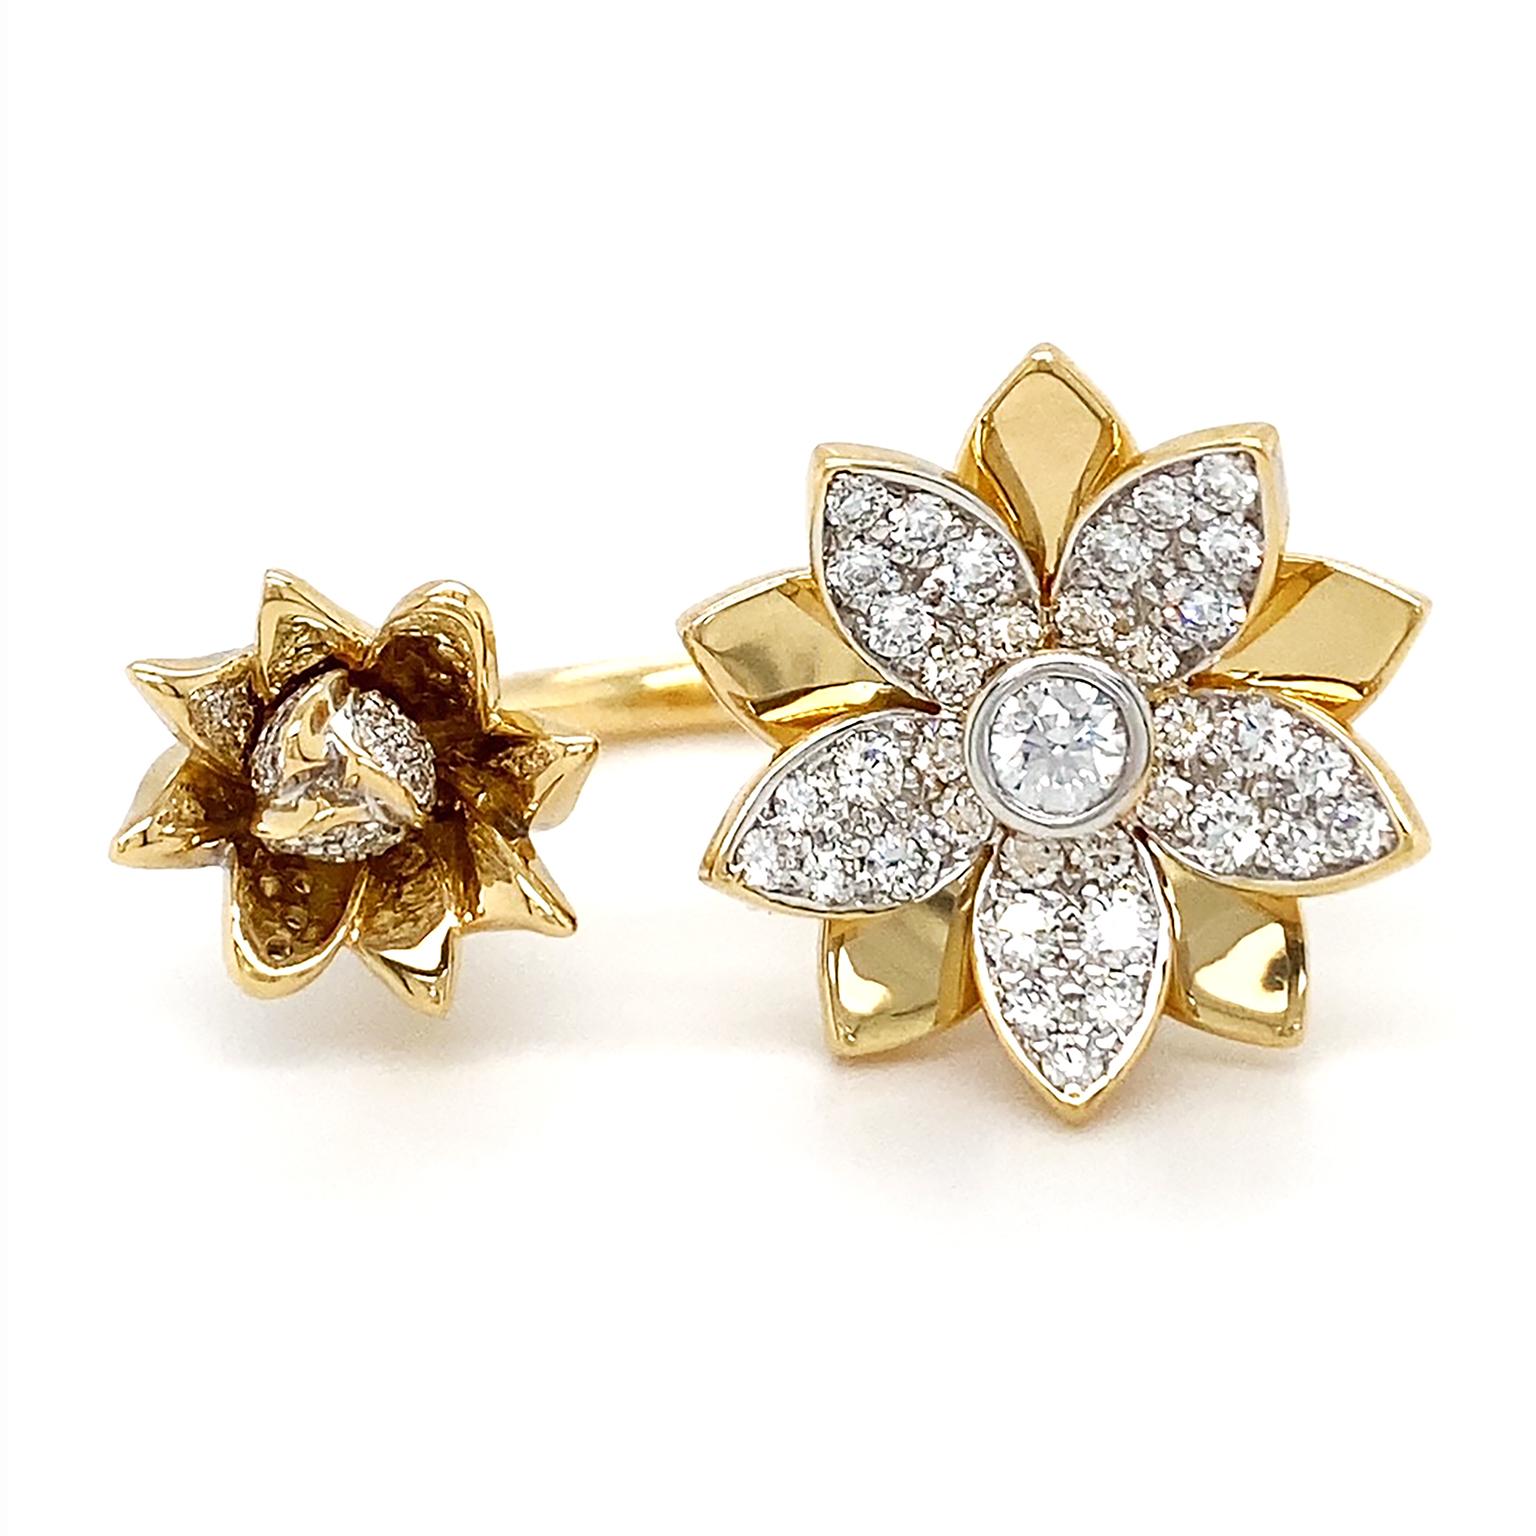 Two radiant flowers bloom in this contemporary designed ring. One on side is smaller flower with its 18k yellow gold petals contrasting against the ornamented petals and bud of brilliant cut diamonds. On the other side a larger flower with pave set